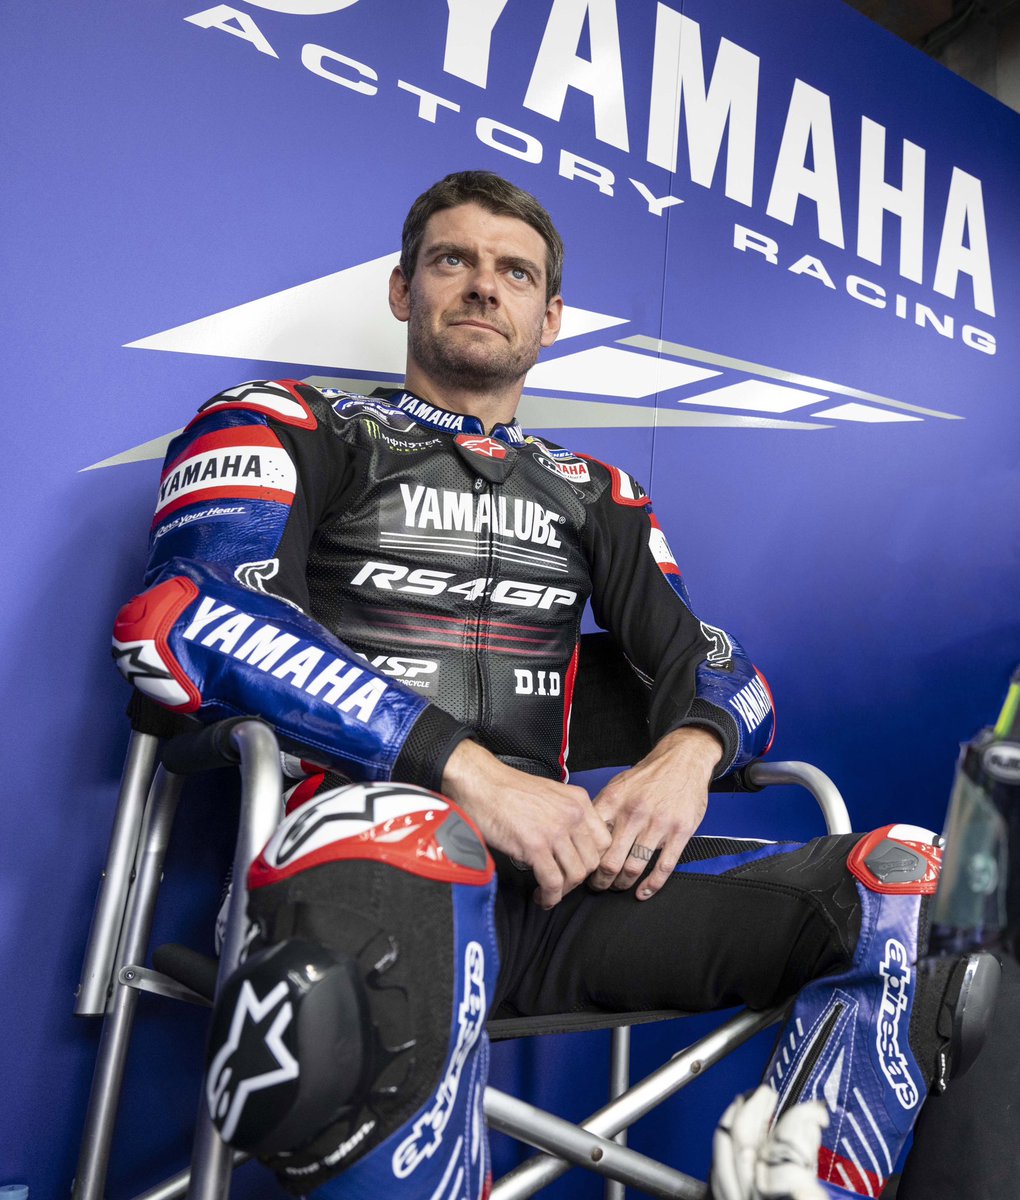 Yamaha regret to announce that @calcrutchlow will not be taking part in the Italian GP as a wild card. The official test rider was suffering from right hand pain this year and underwent a procedure to fix it. However, complications prohibit him from entering the Italian GP.